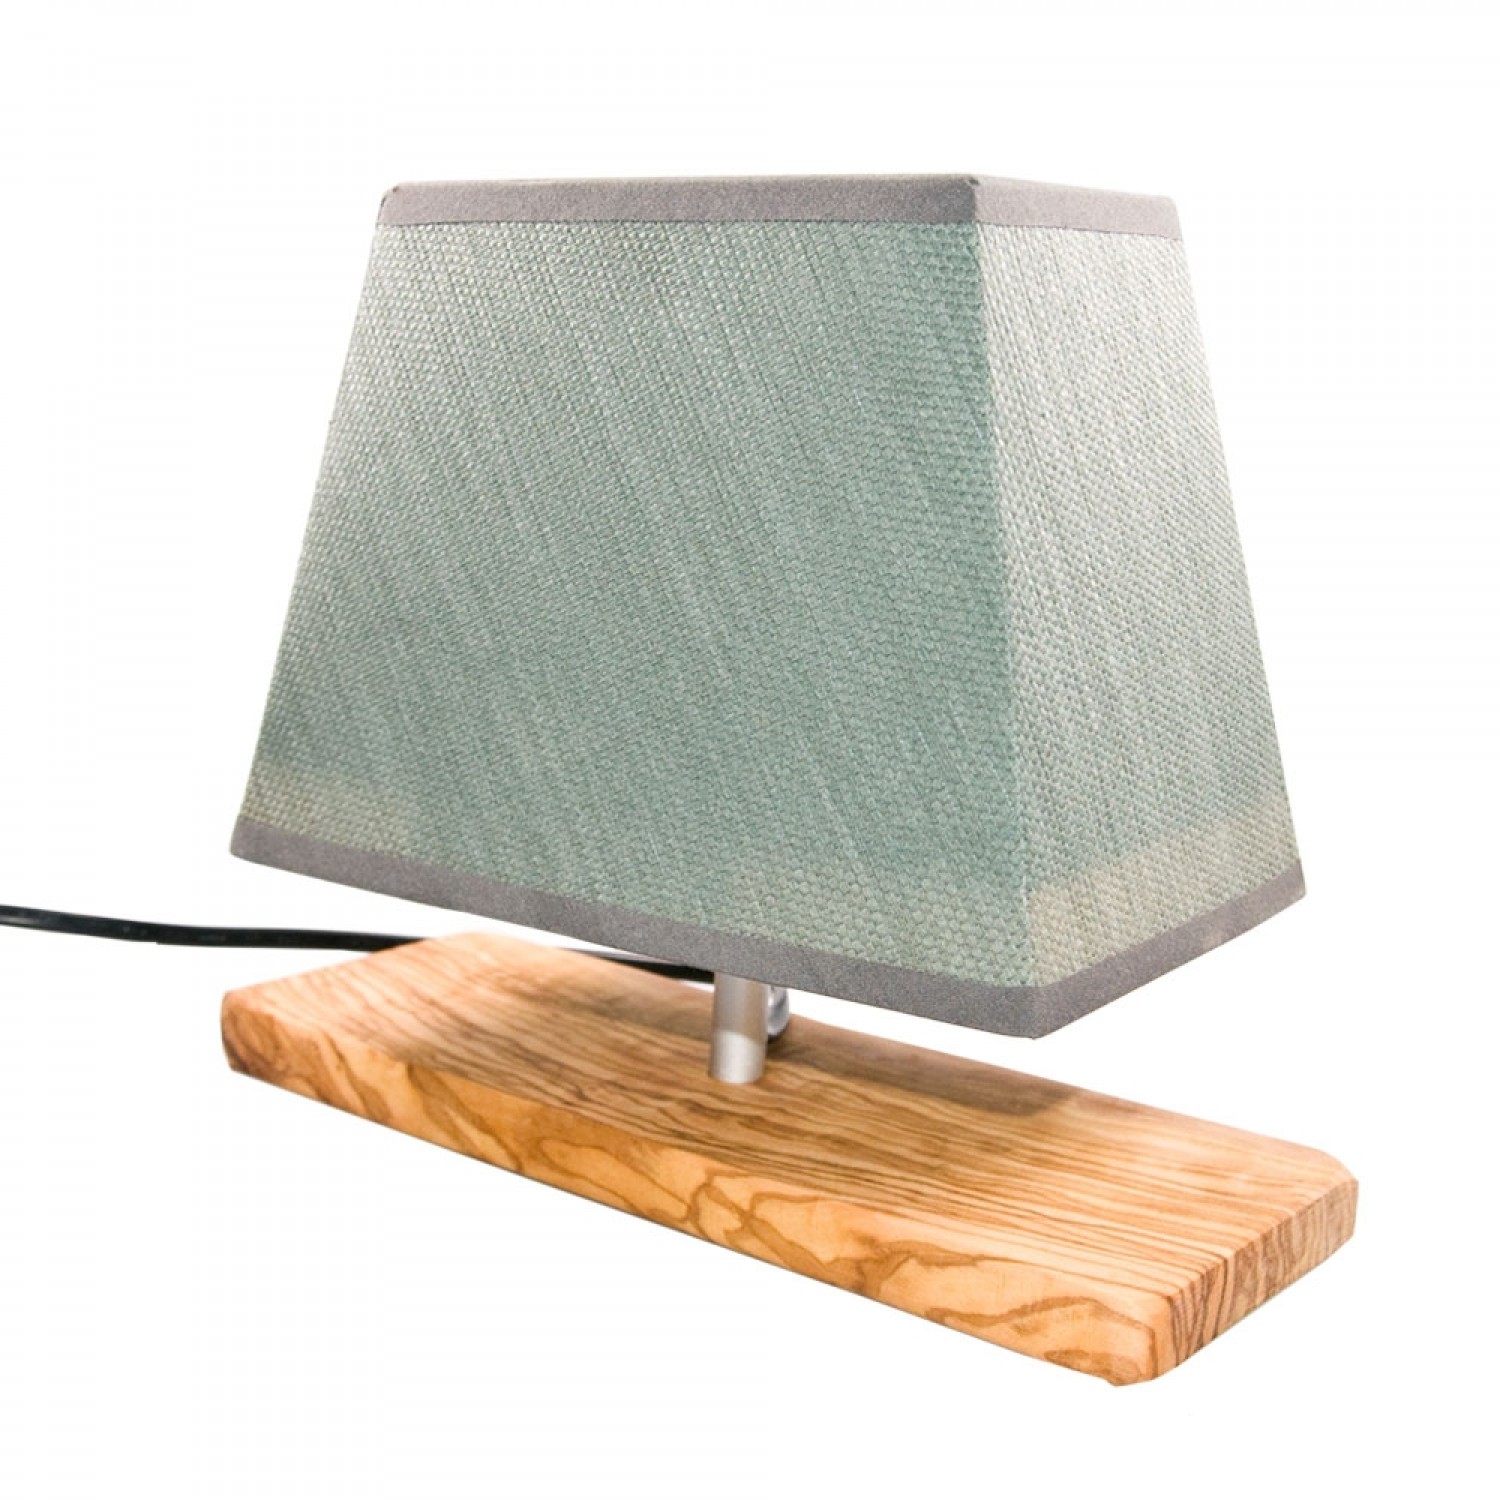 Table Lamp C.A. oblong Olive Wood Base & olive-green Shade » D.O.M.